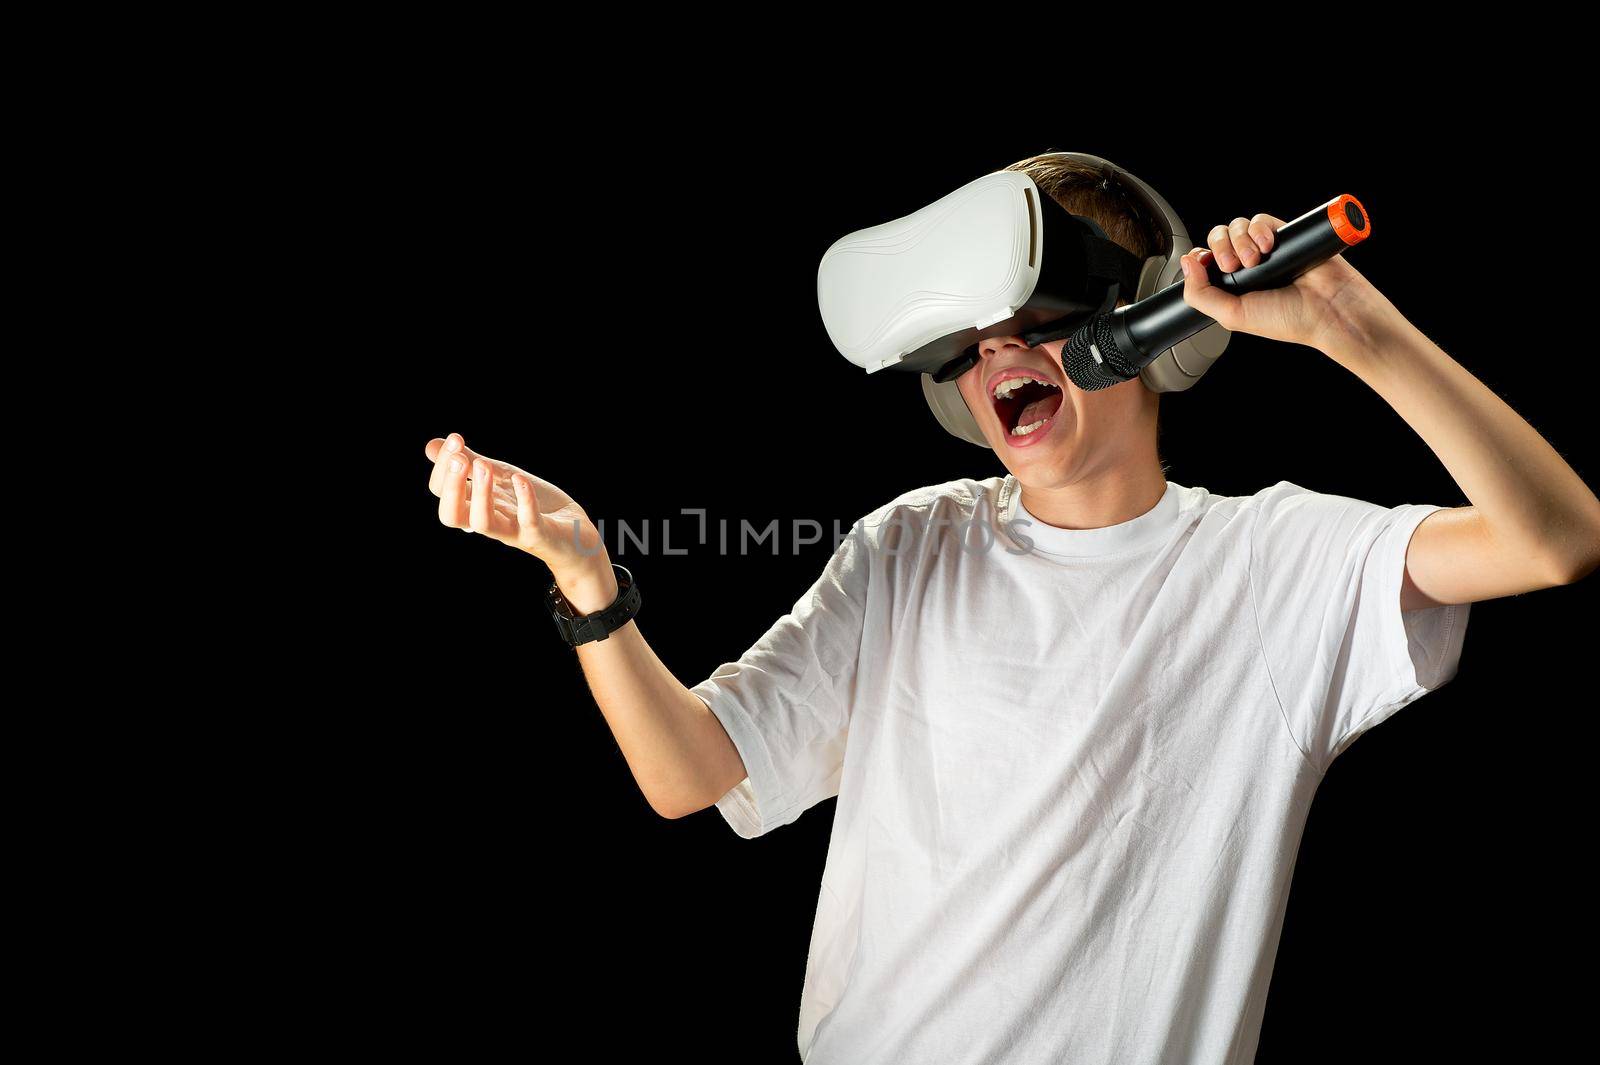 teenager use modern technologies for entertainment or education. VR musician concept by PhotoTime